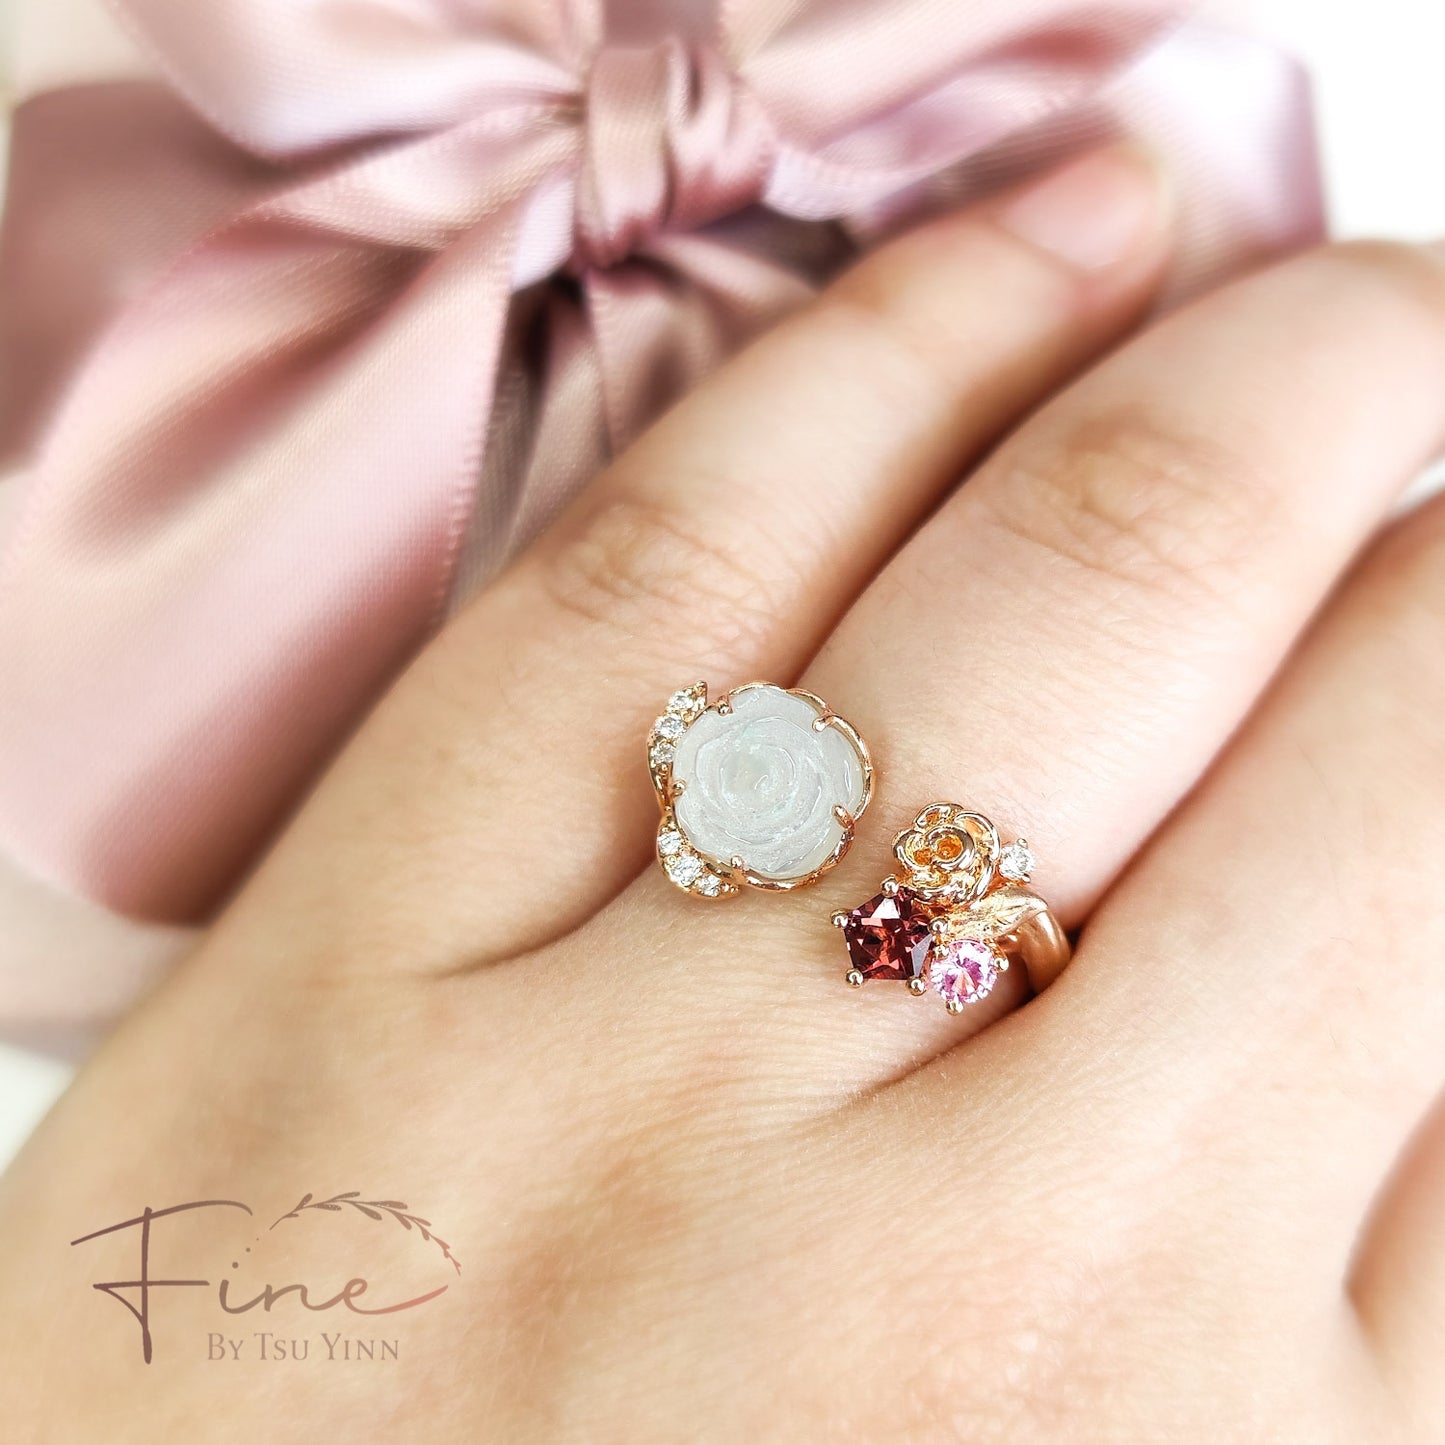 Carved Rose Jadeite Open Ring with Burgundy Spinel, Pink Sapphire and White Diamonds